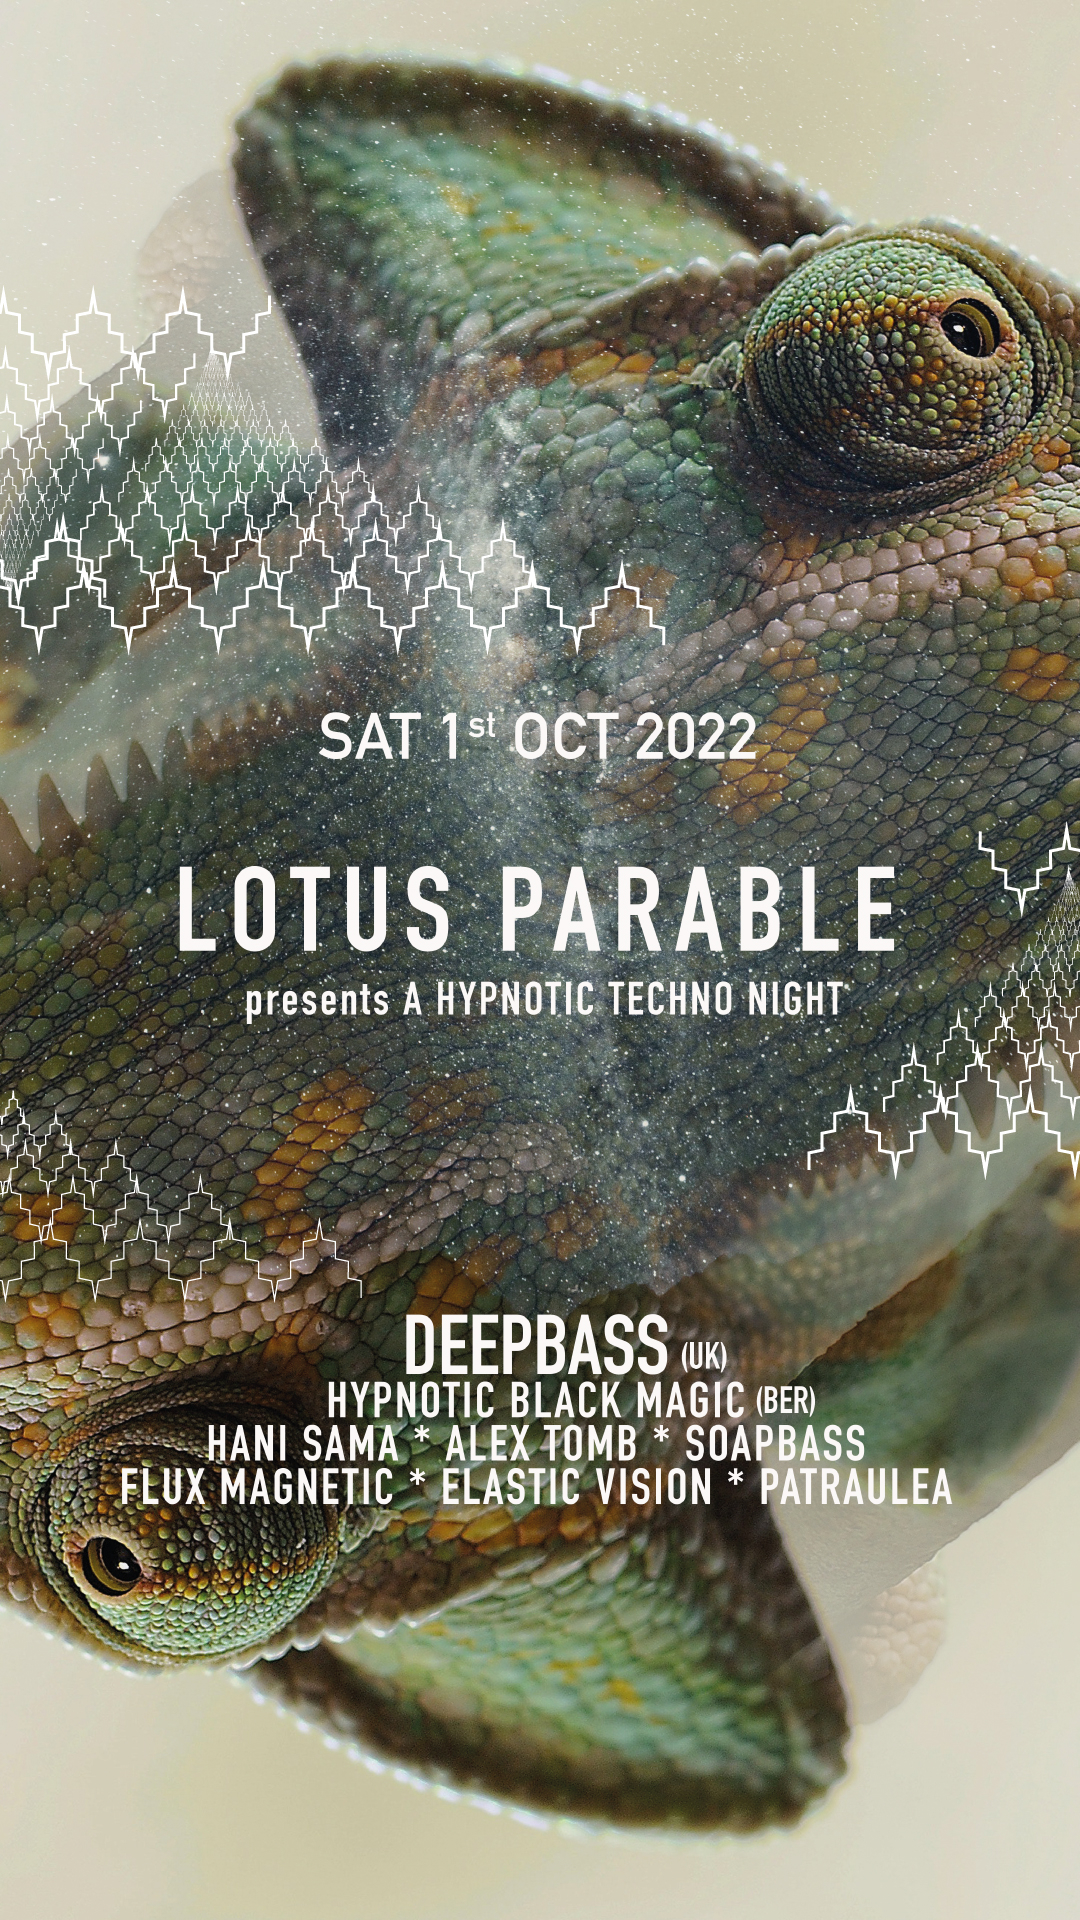 Lotus Parable presents a Hypnotic Techno Night - Flyer back